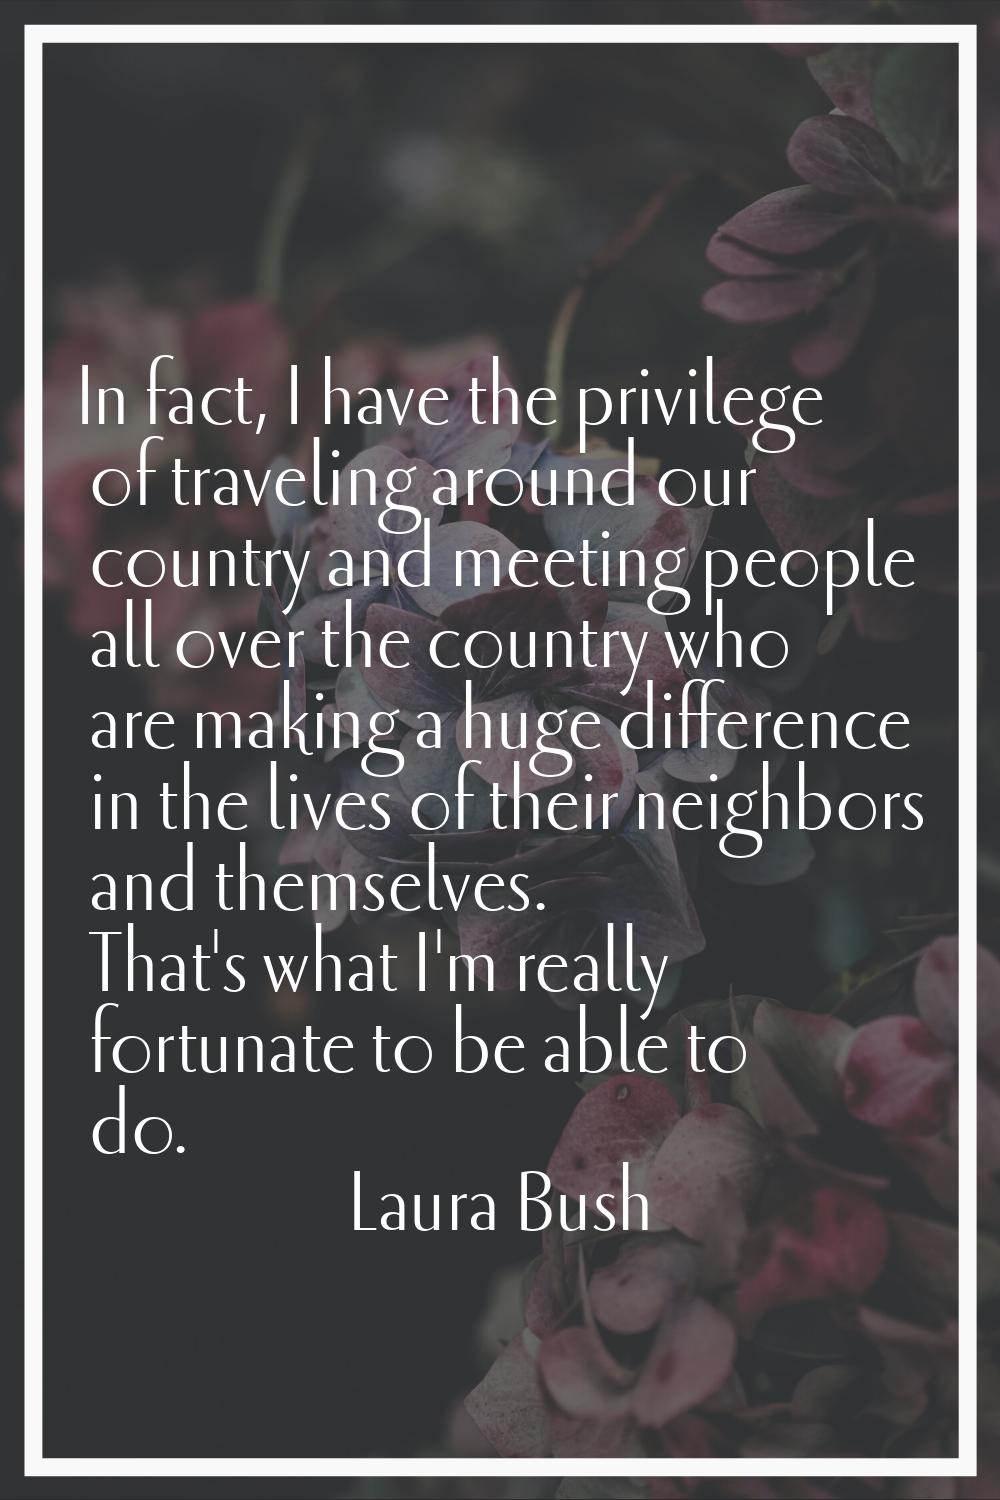 In fact, I have the privilege of traveling around our country and meeting people all over the count